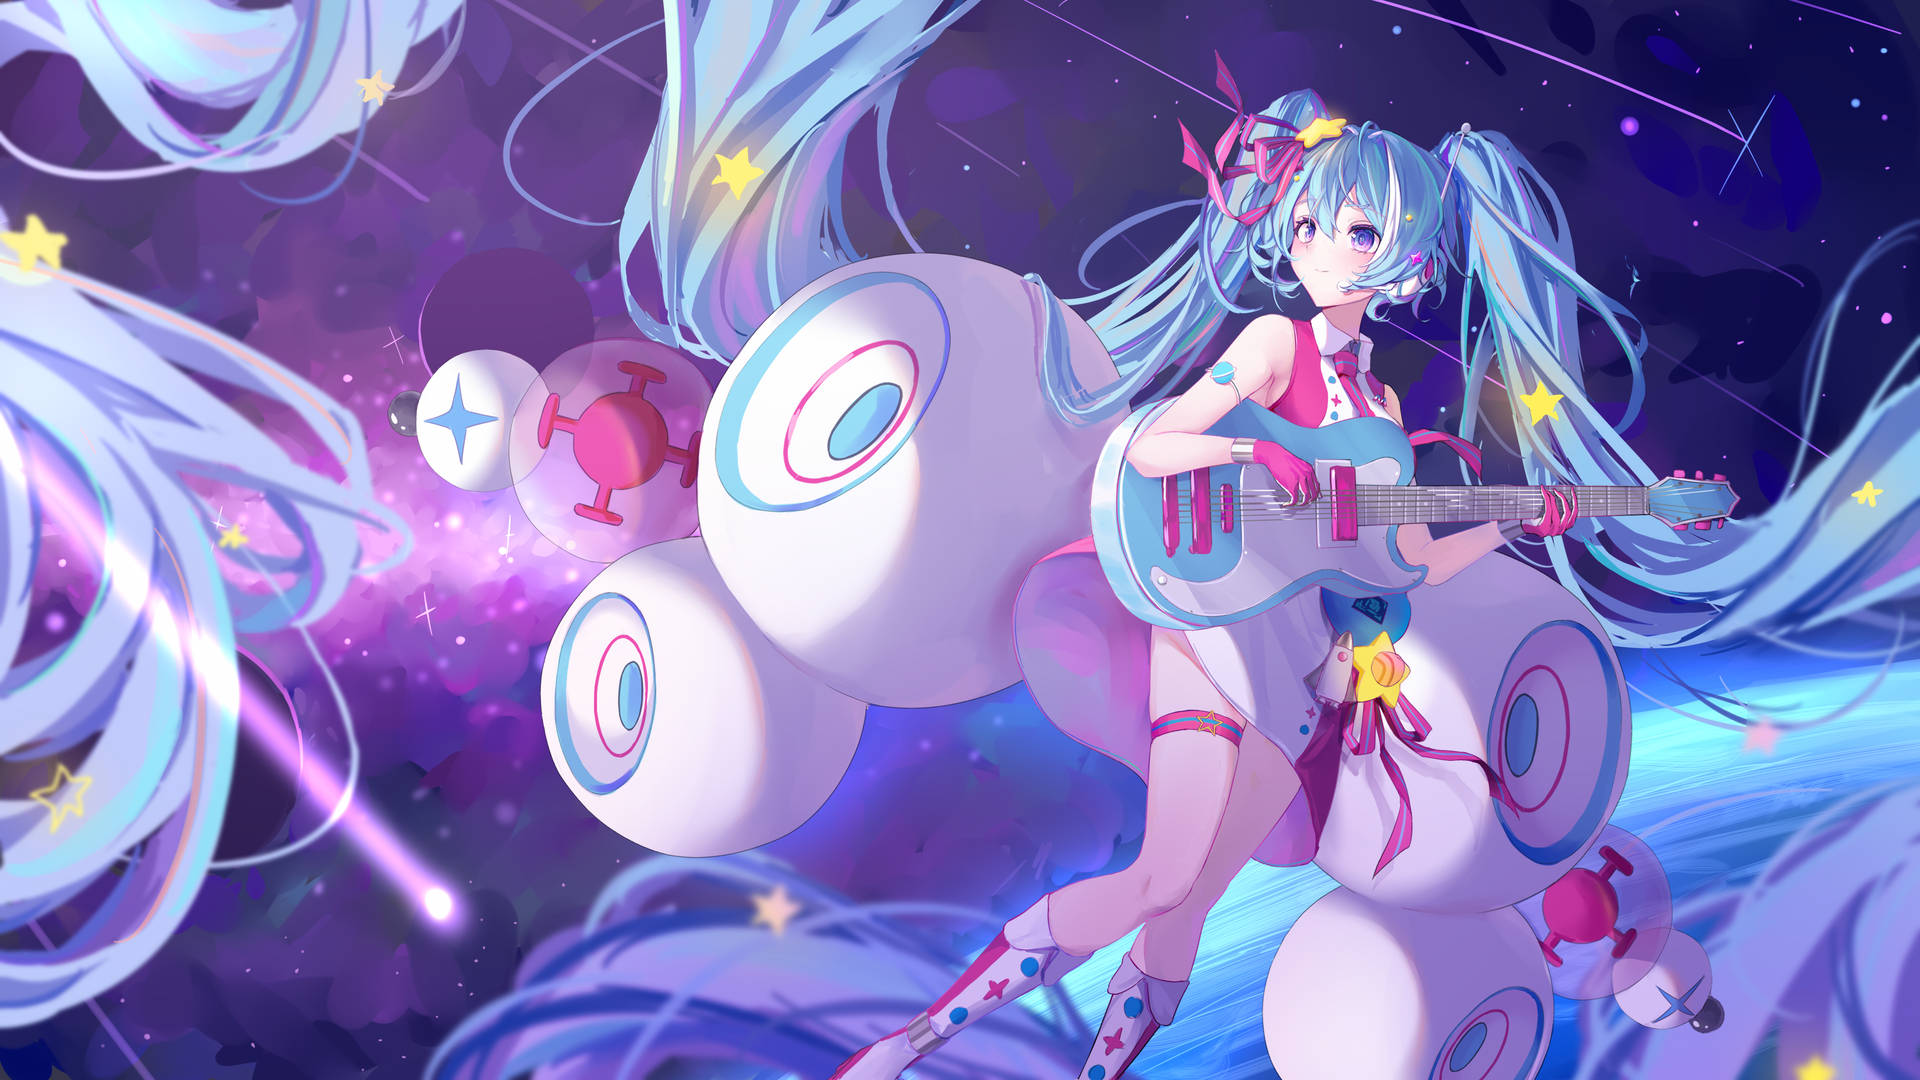 Miku Hatsune and friends singing their hearts out Wallpaper